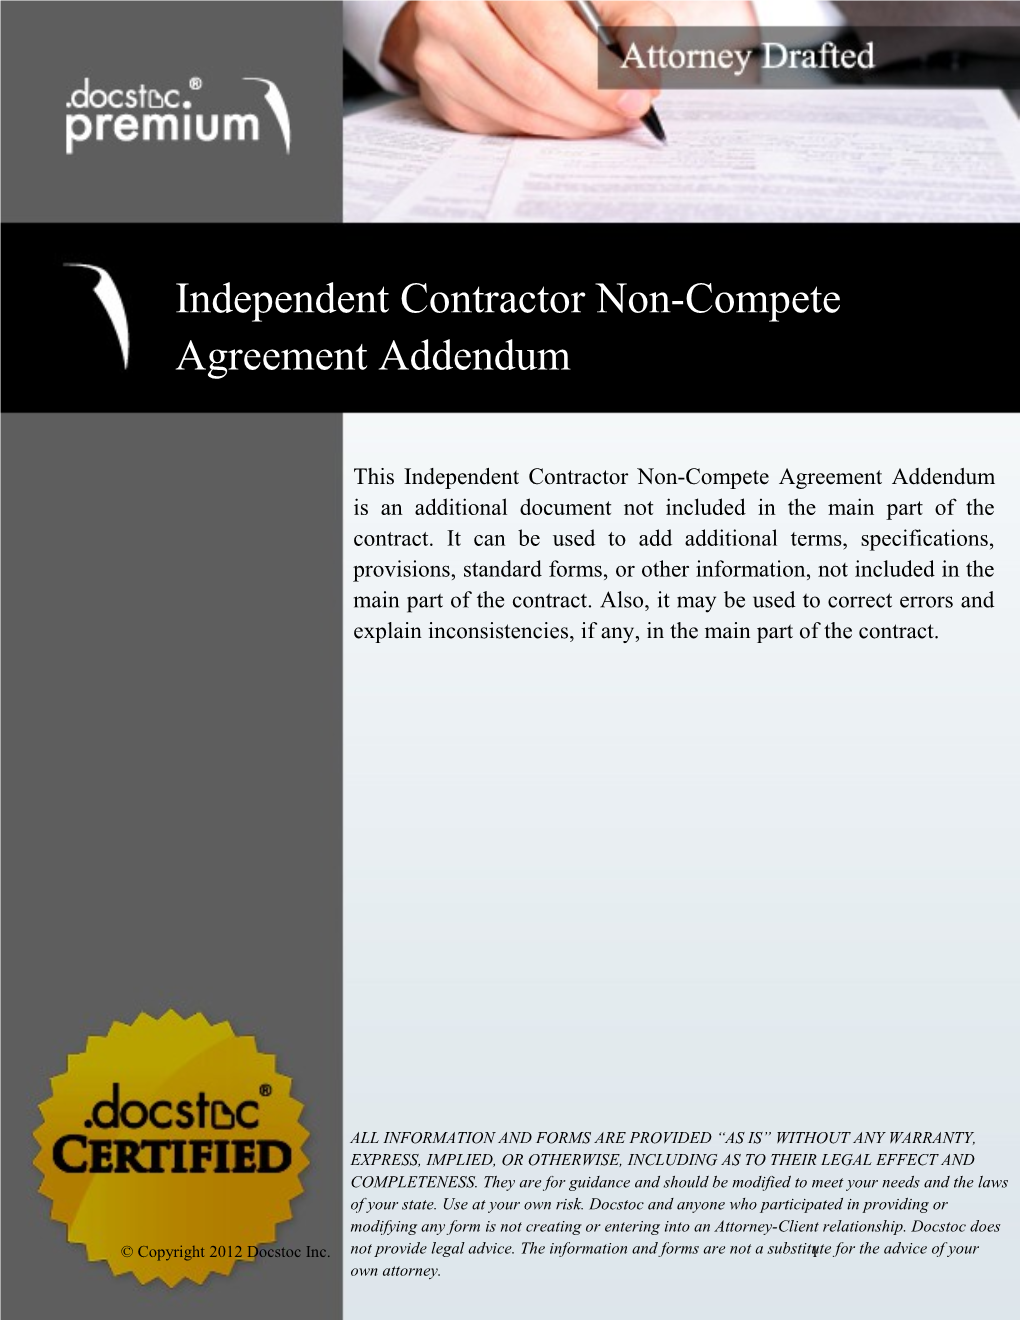 Independent Contractor Non-Compete Agreement Addendum